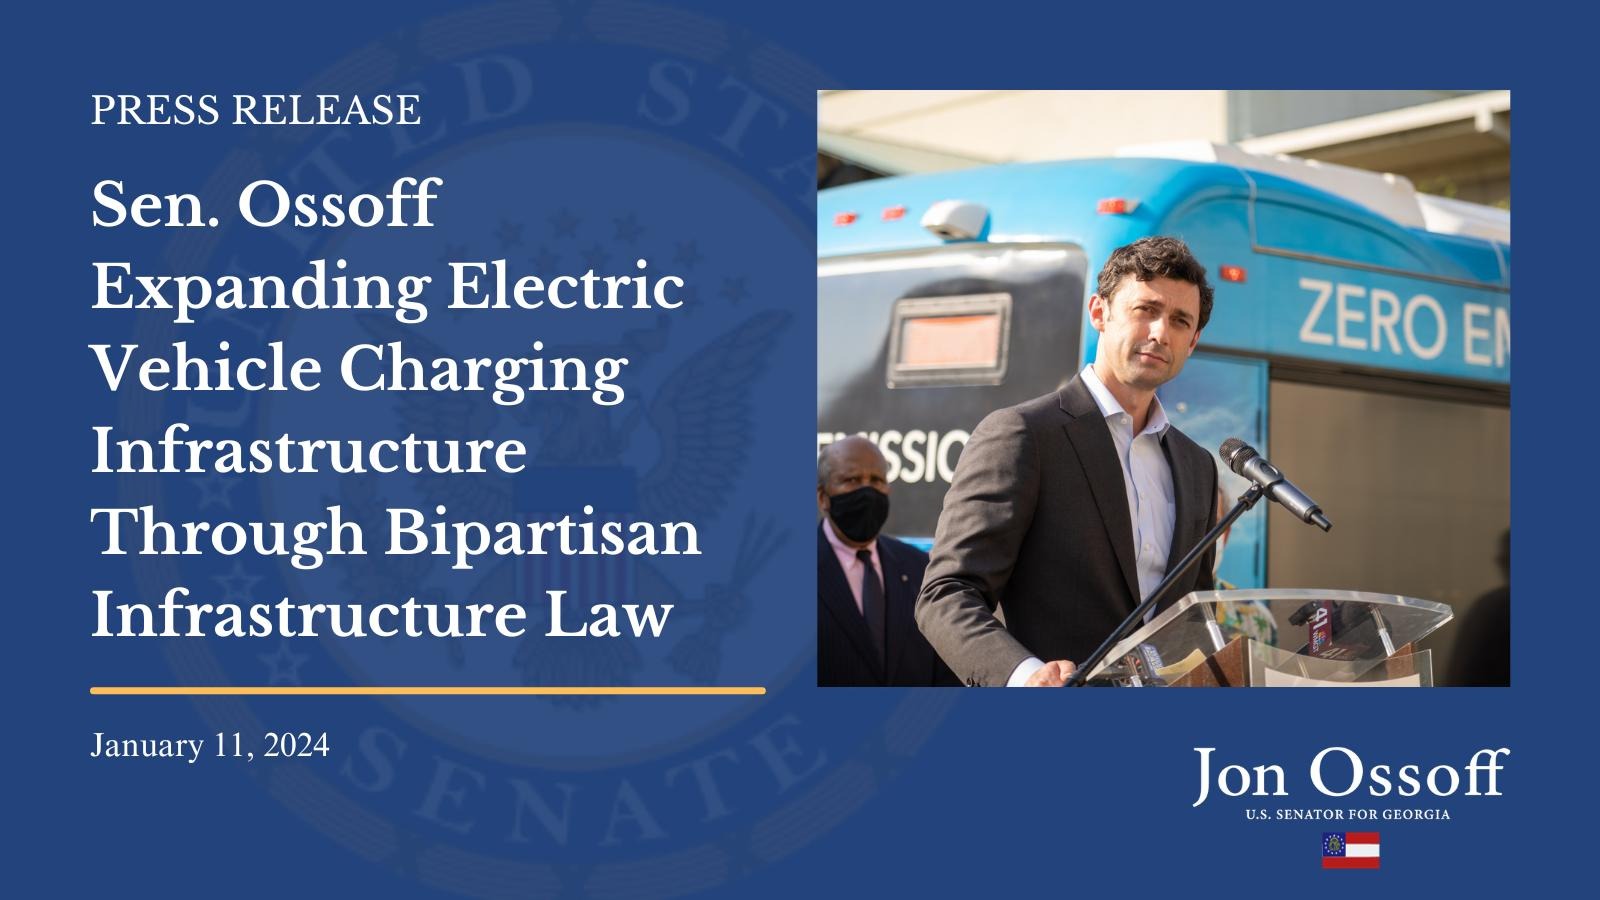 Sen. Ossoff Expanding Electric Vehicle Charging Infrastructure Through